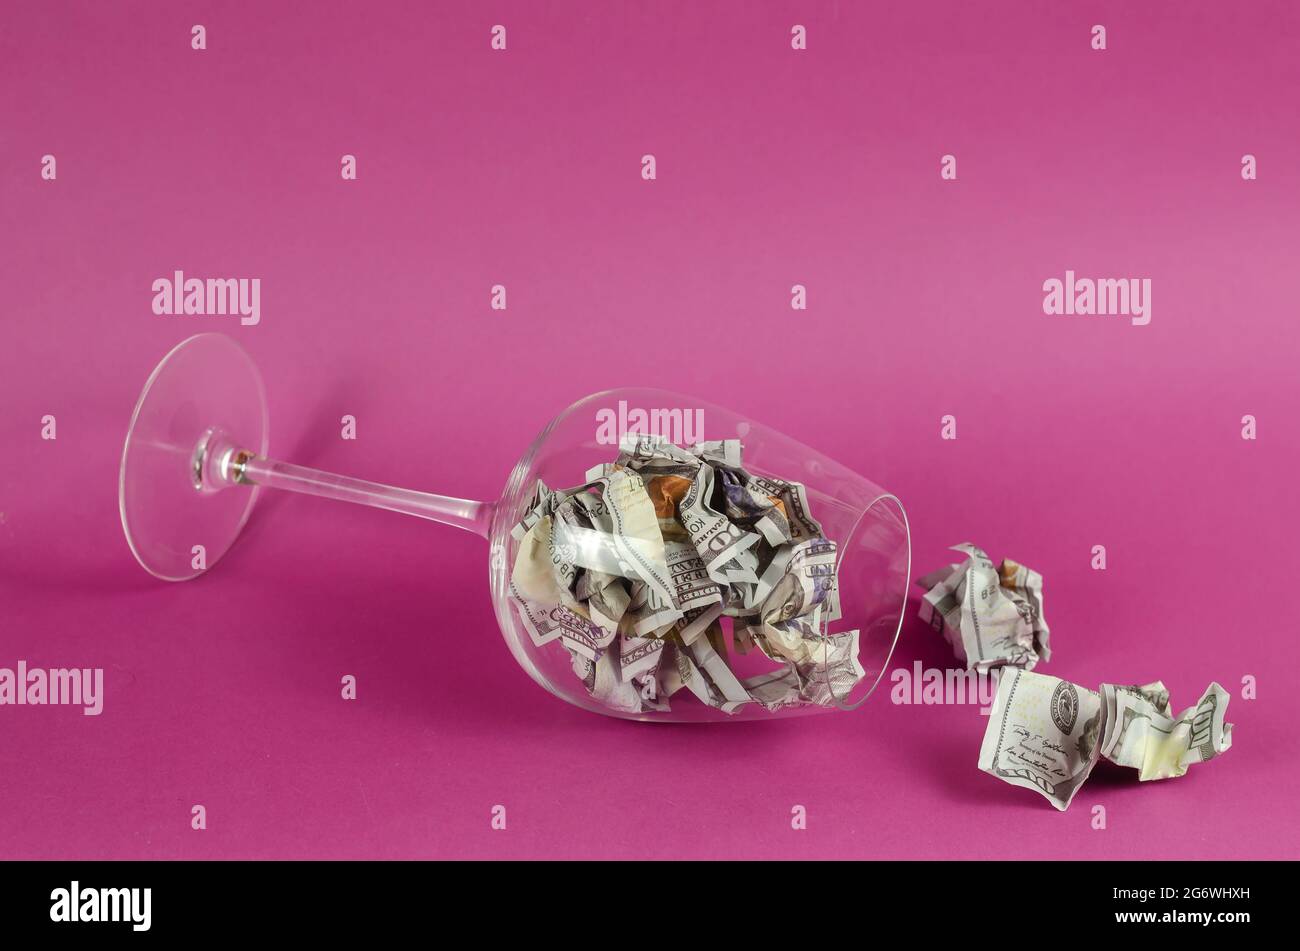 Transparent wine glass with money lying on pink background. Glass is full Crumpled hundred dollar bills. Stock Photo